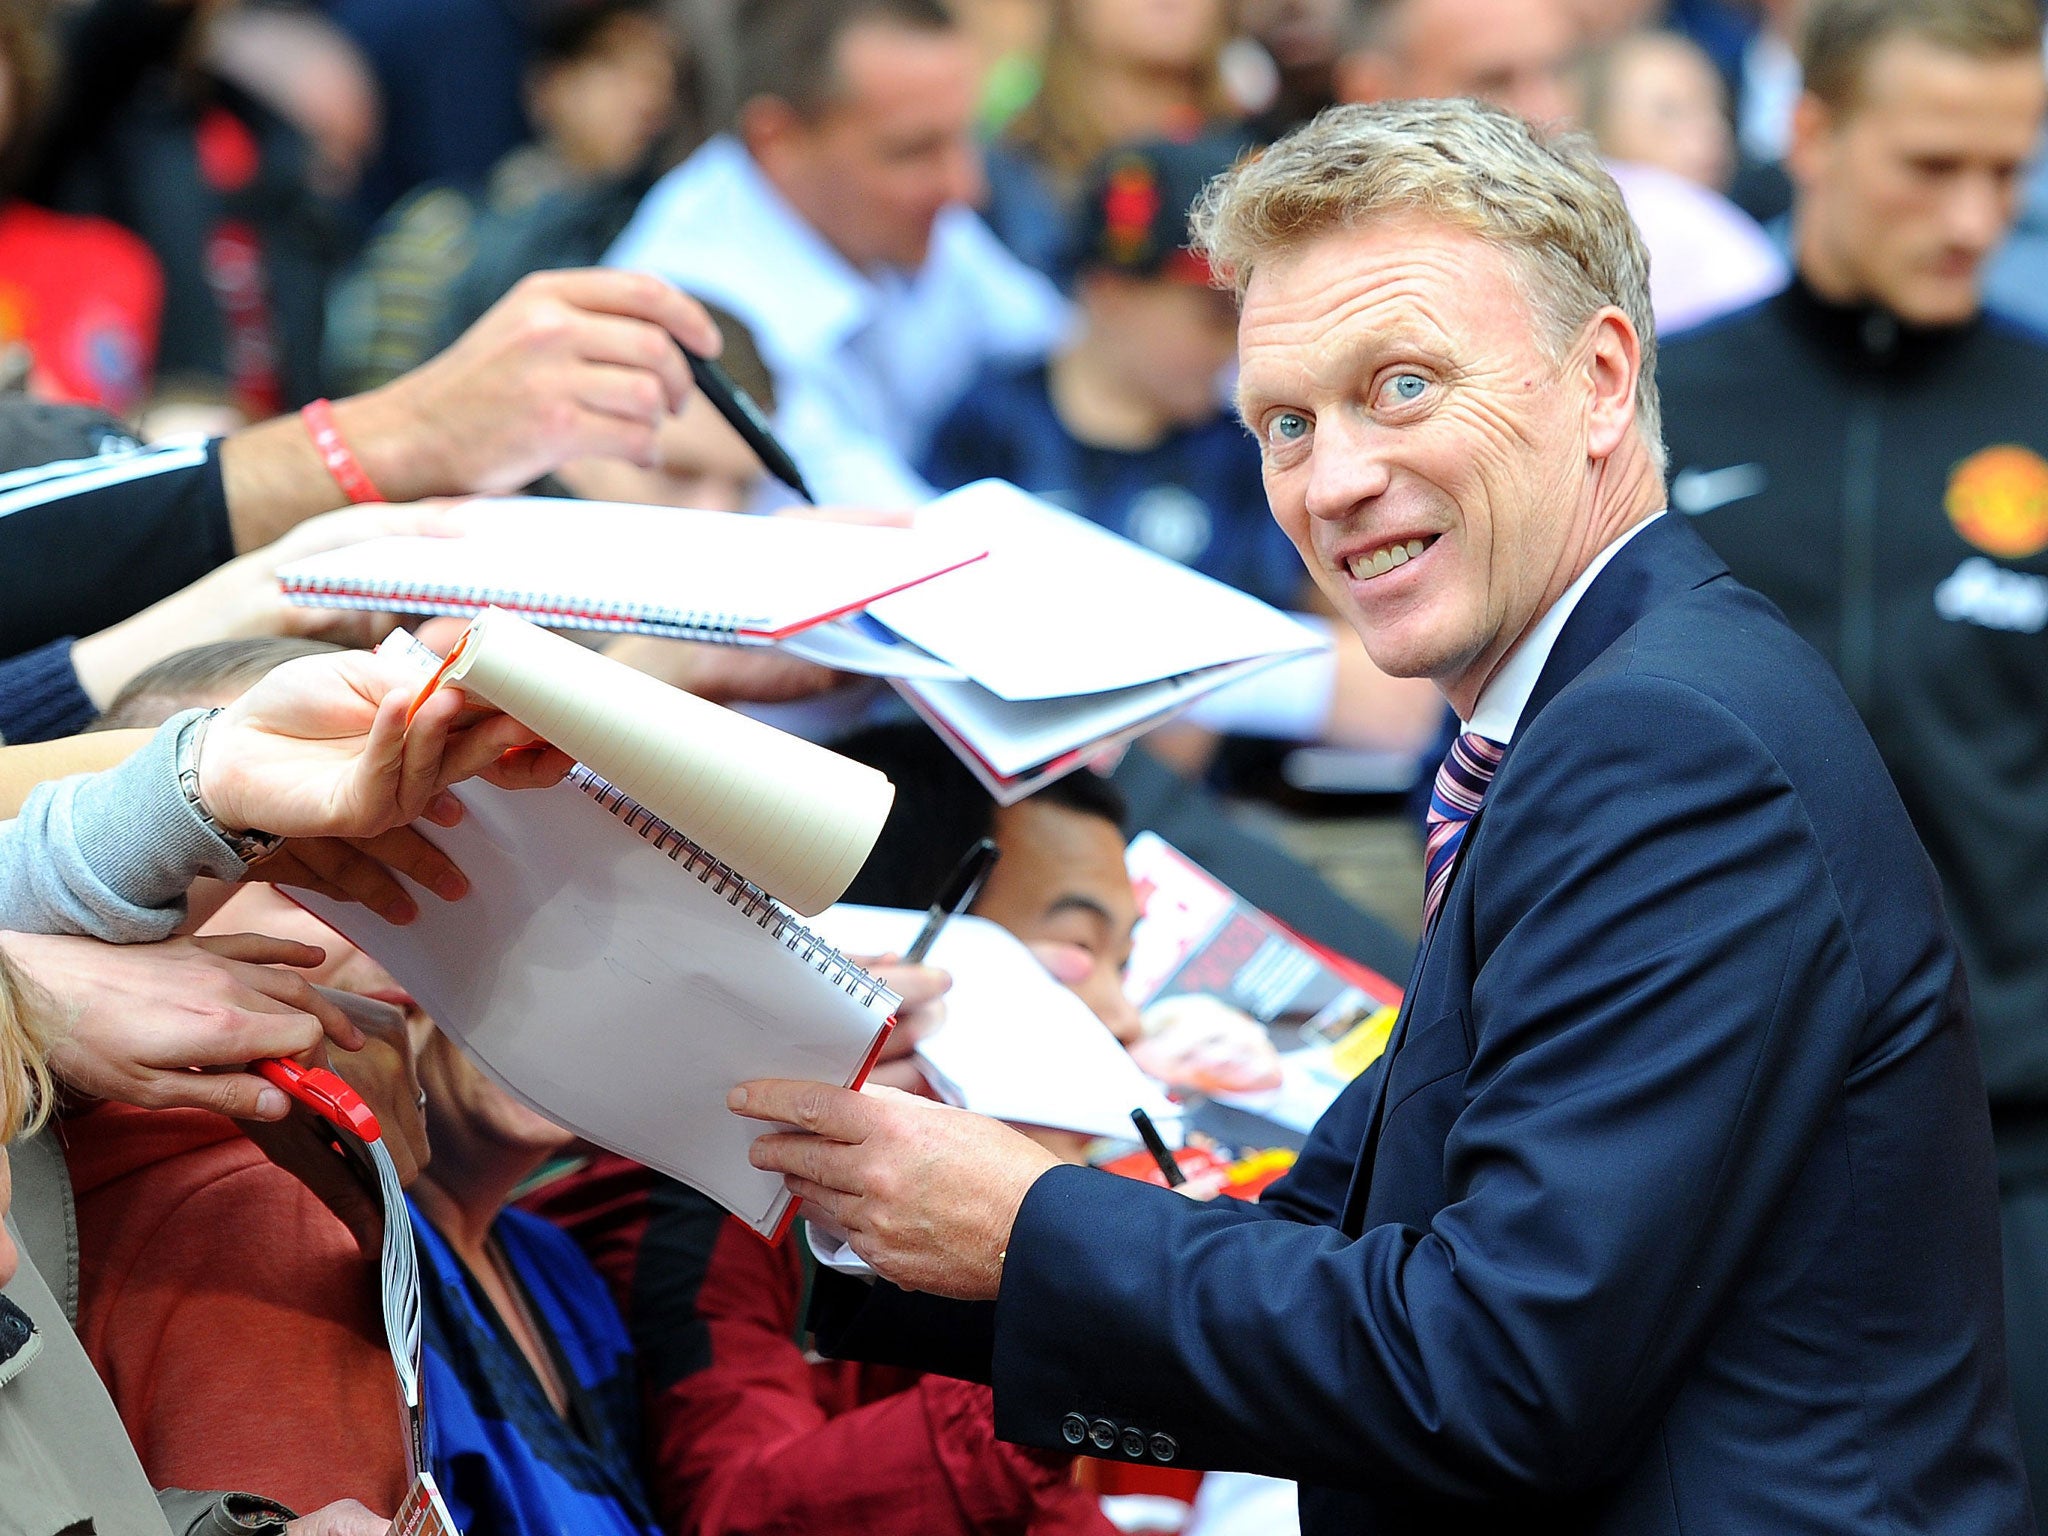 David Moyes signs autographs before the game at Old Trafford